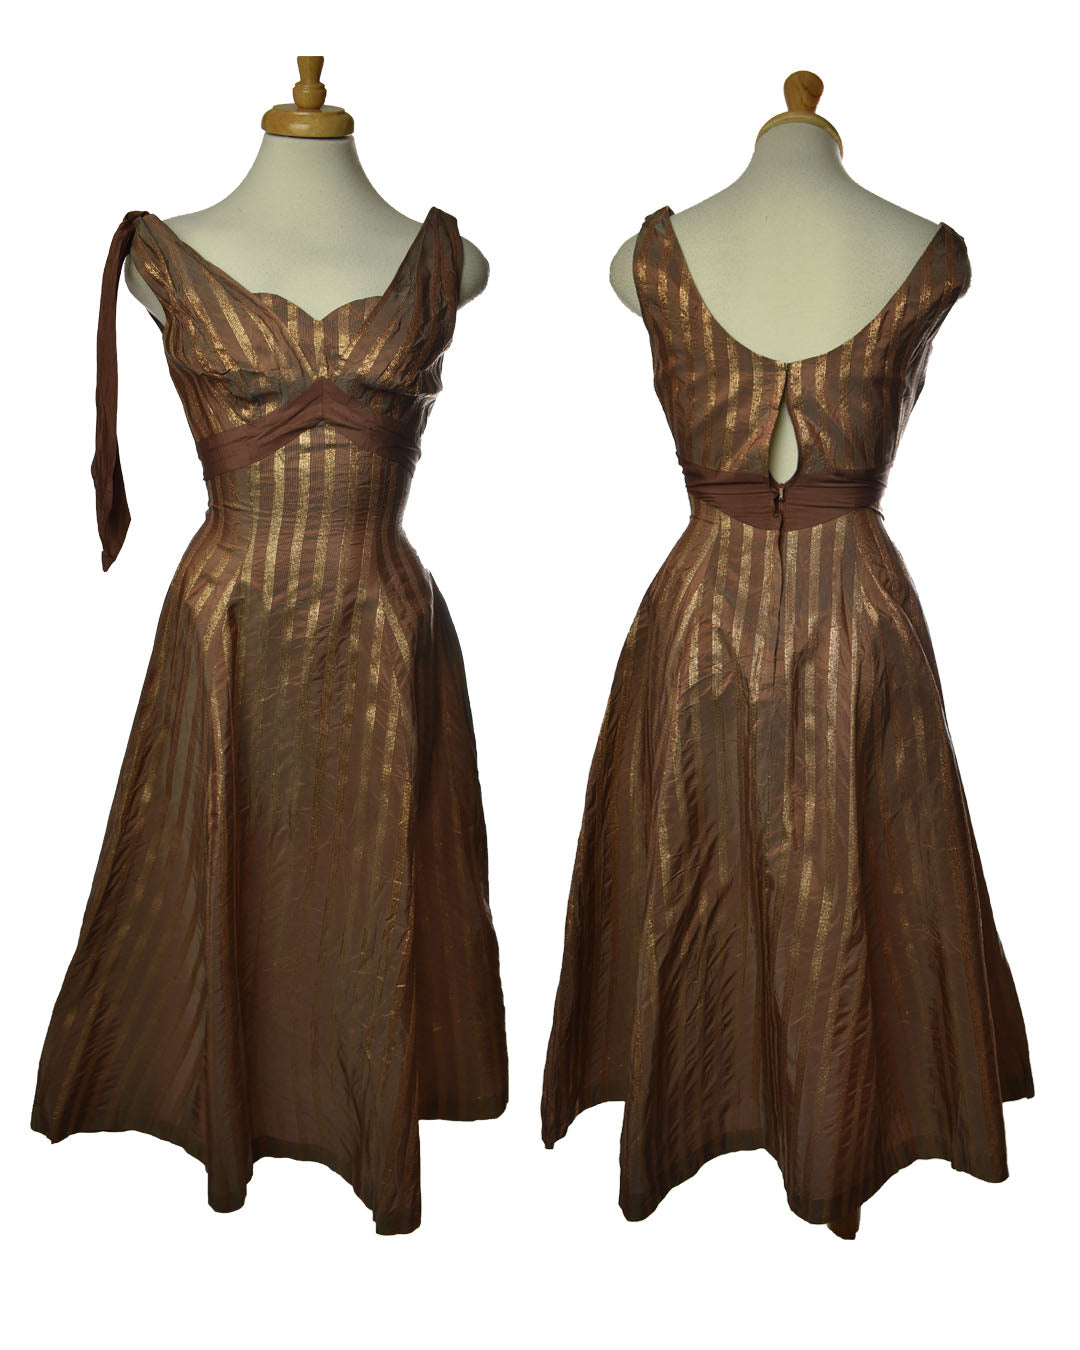 Vintage 50s Silk Metallic Brown Mid Century Pin up Dress by Jeanette Alexander by California Size 10